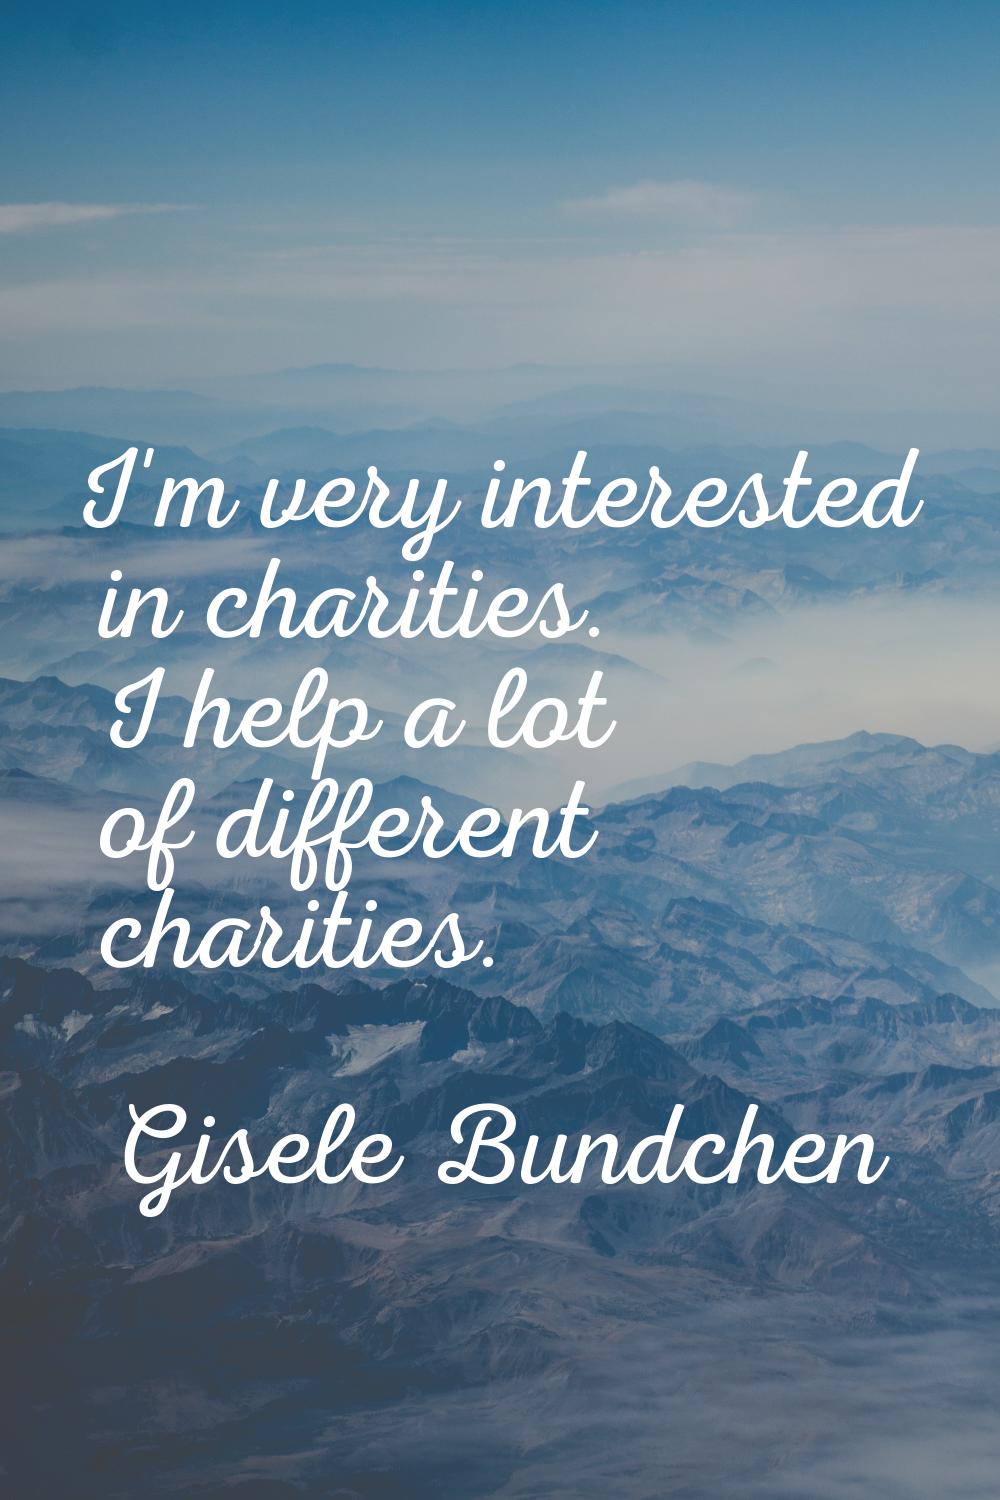 I'm very interested in charities. I help a lot of different charities.